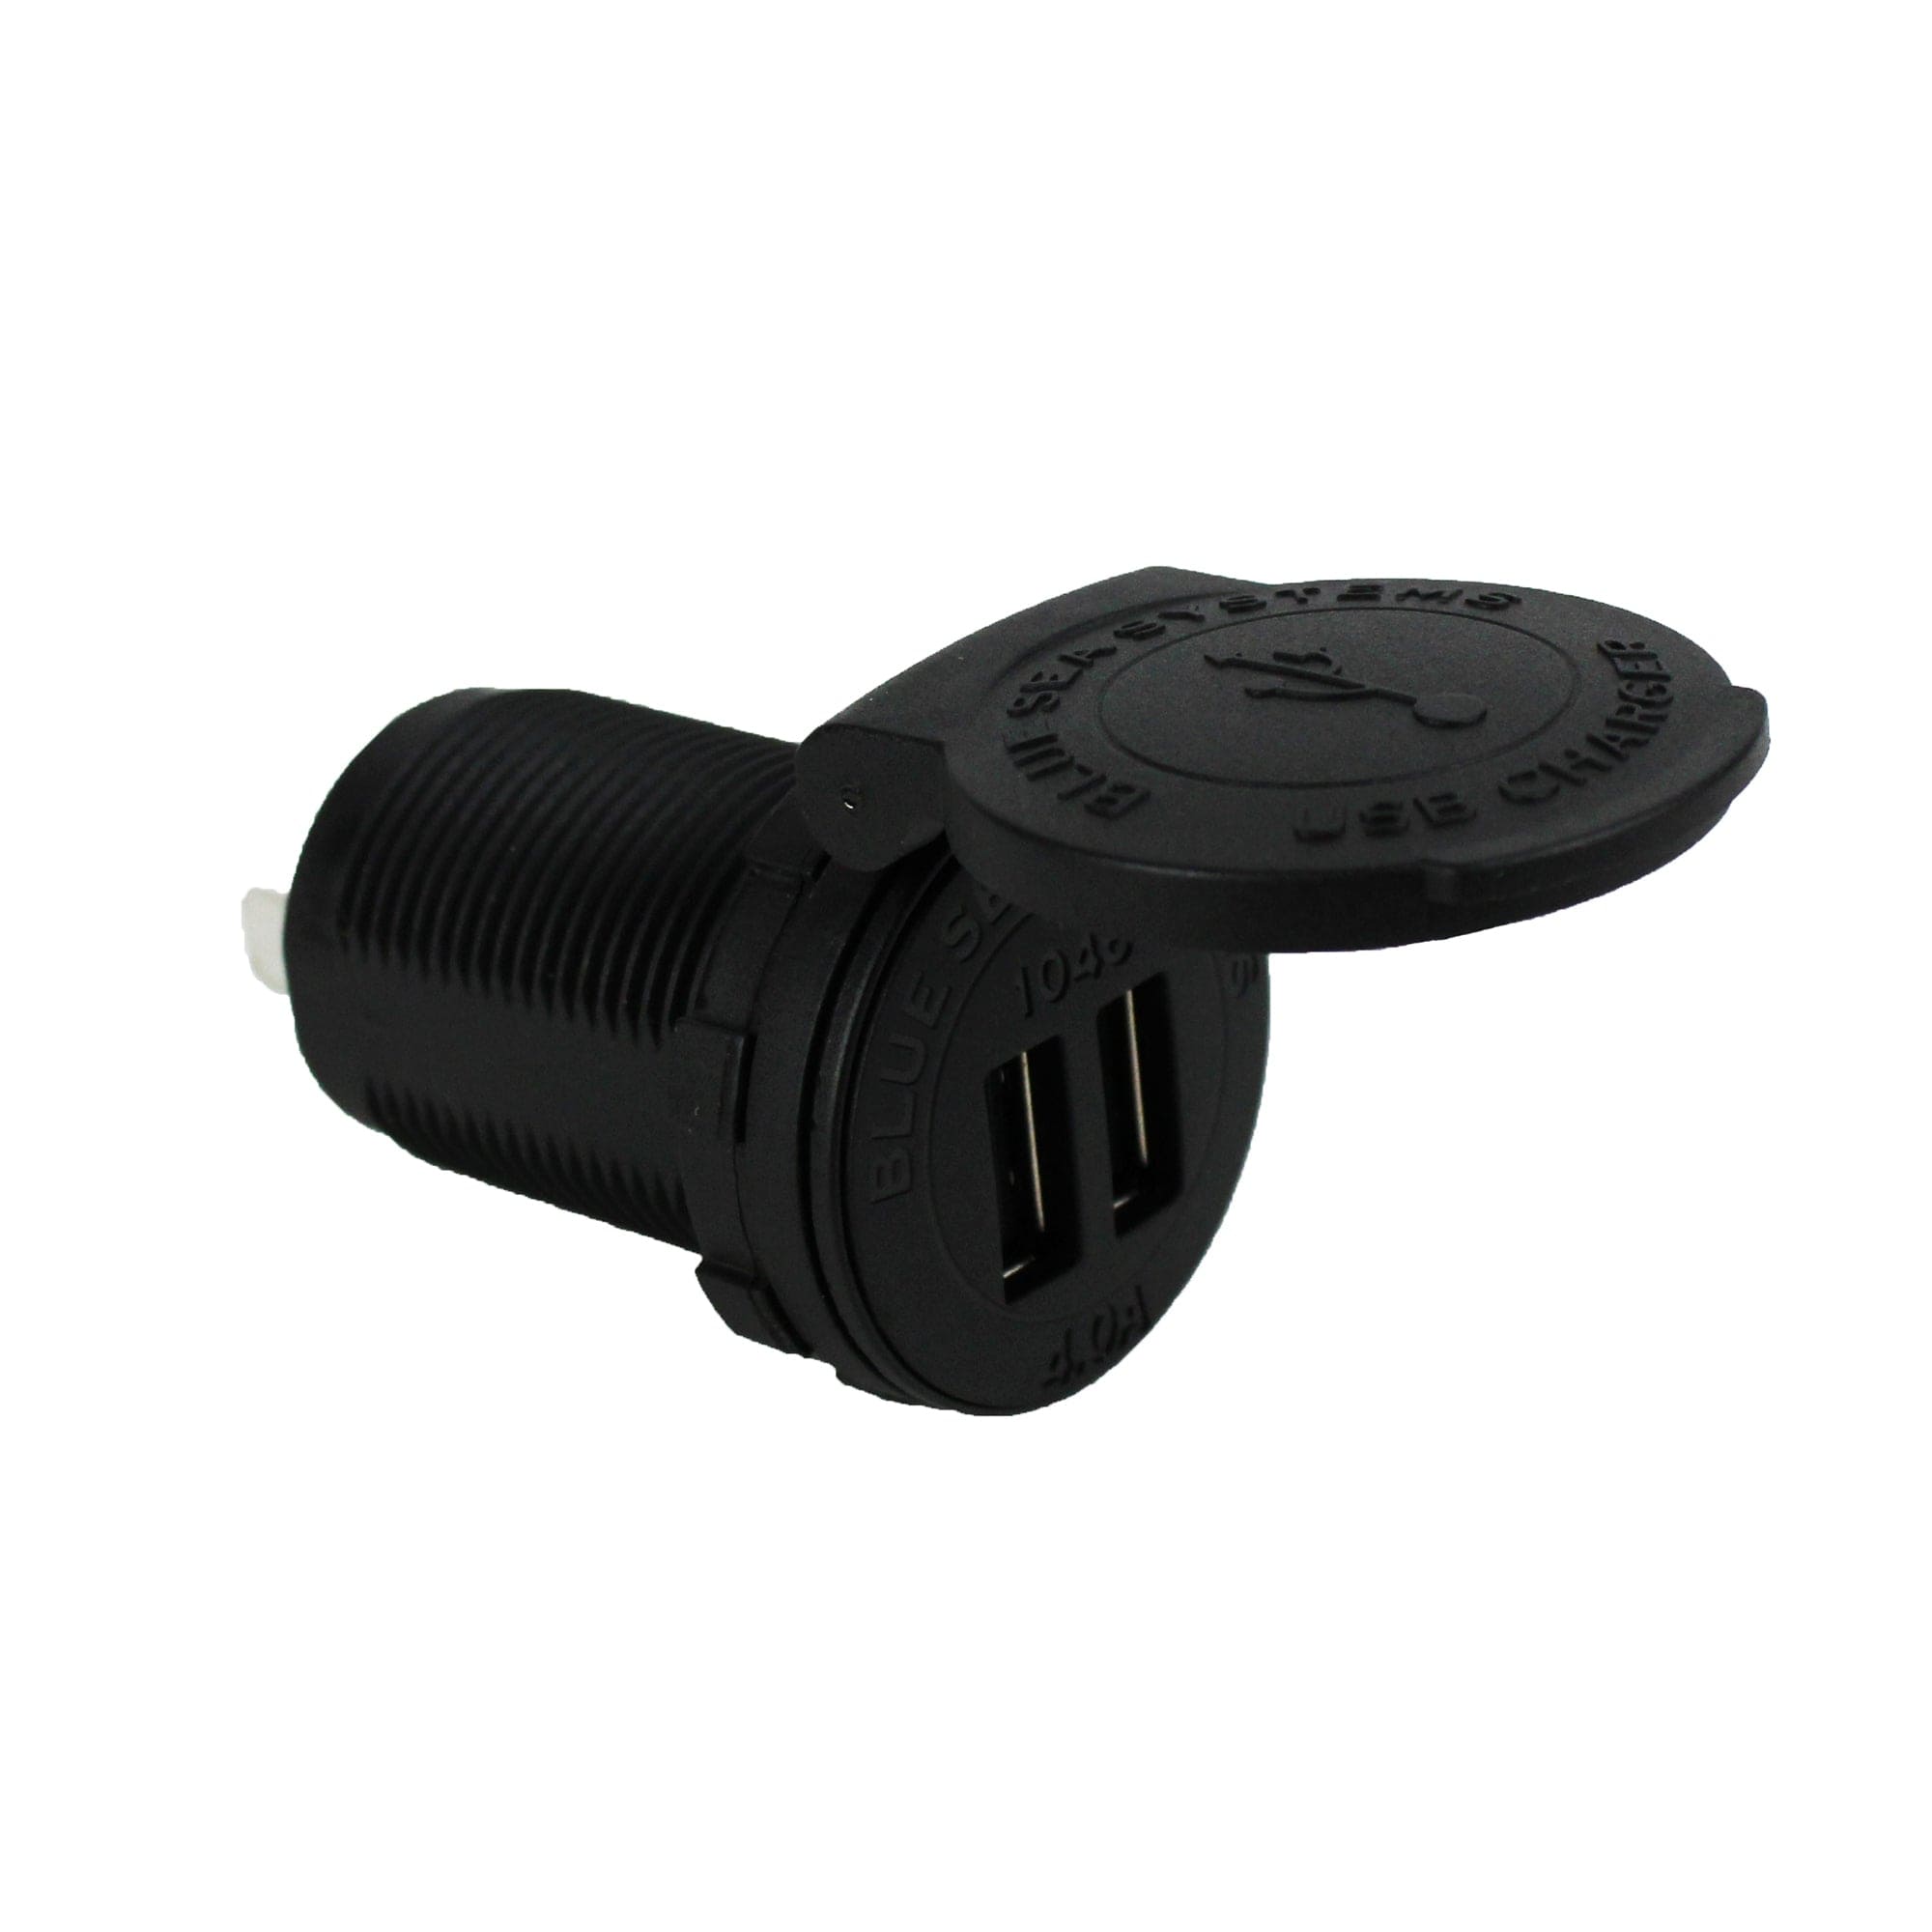 Blue Sea Systems 1046-BSS 48V Dual USB Socket Mount Charger W/ Intelligent Device Recognition